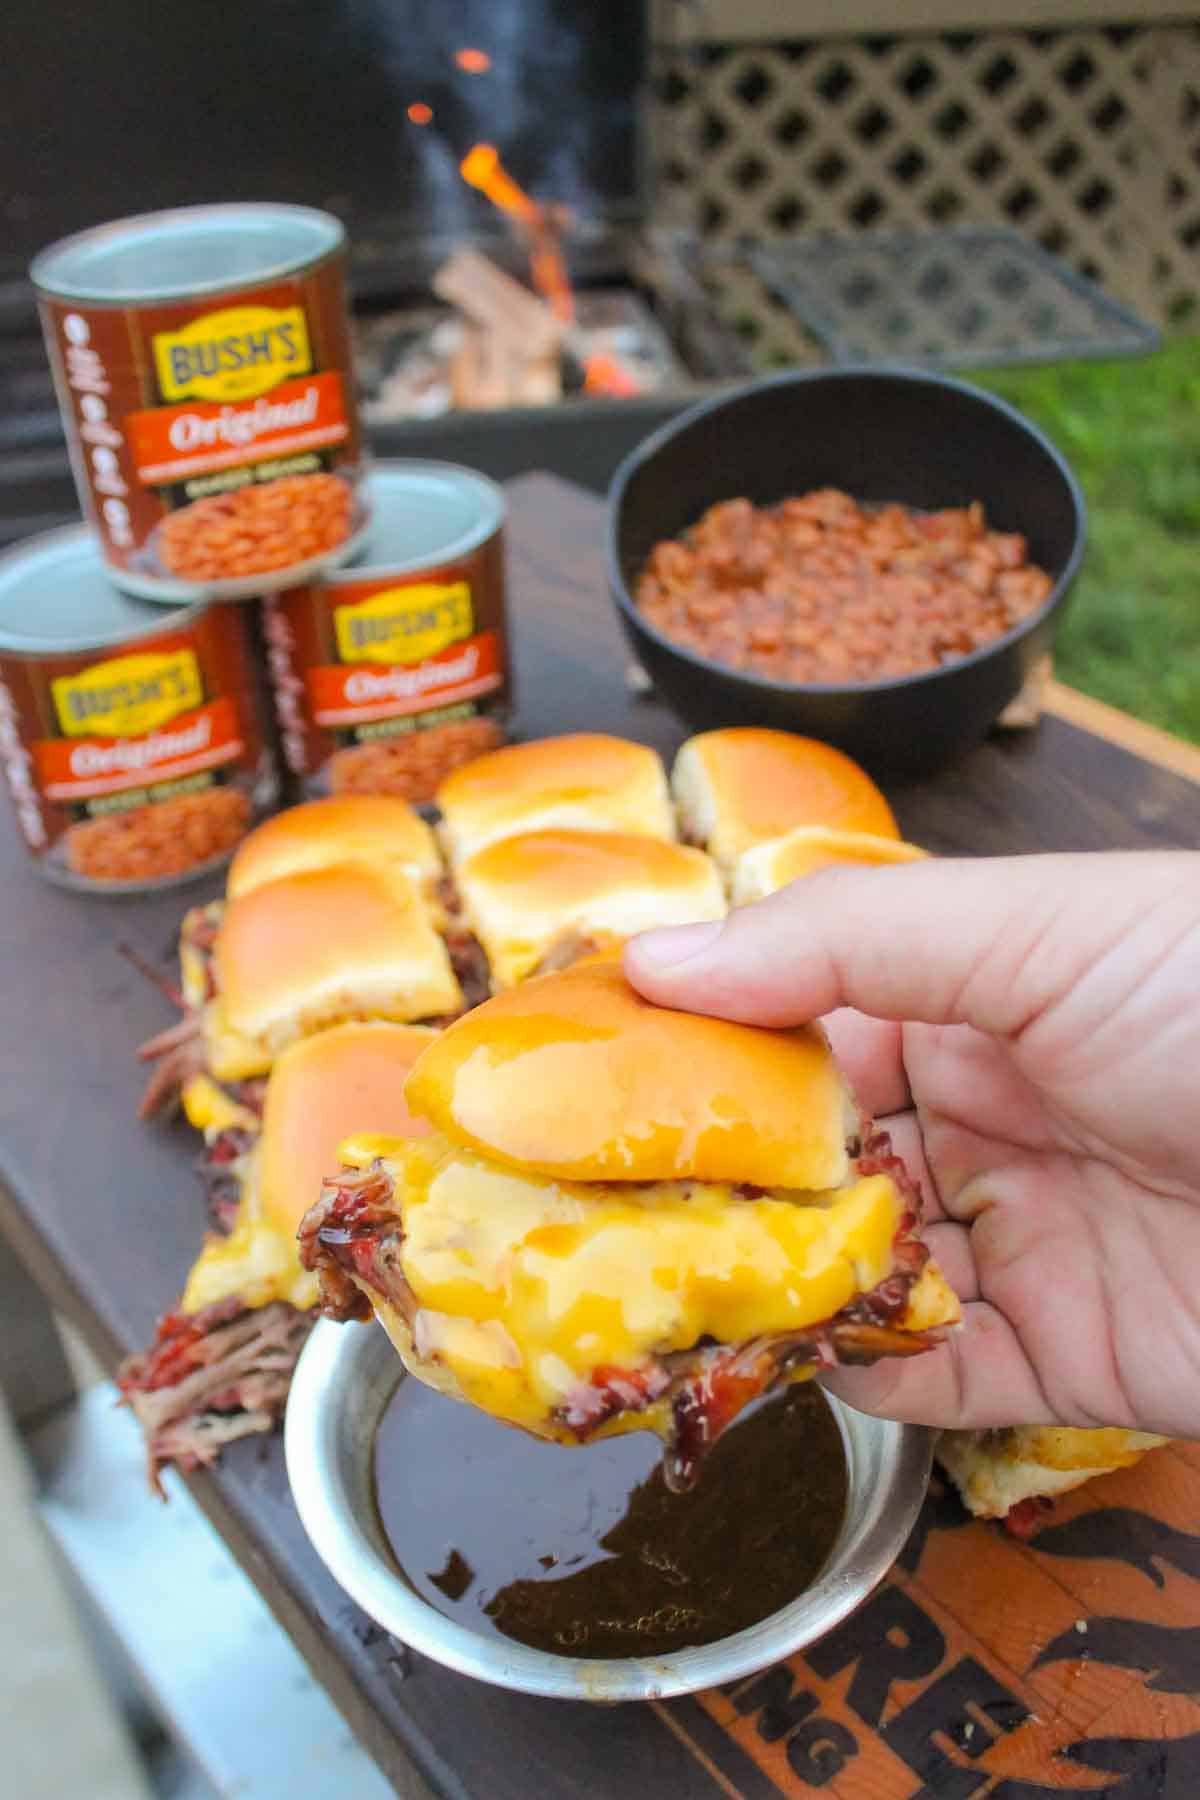 The pulled beef sliders with steakhouse baked beans sitting all together on a cutting board so that we can serve the dish.